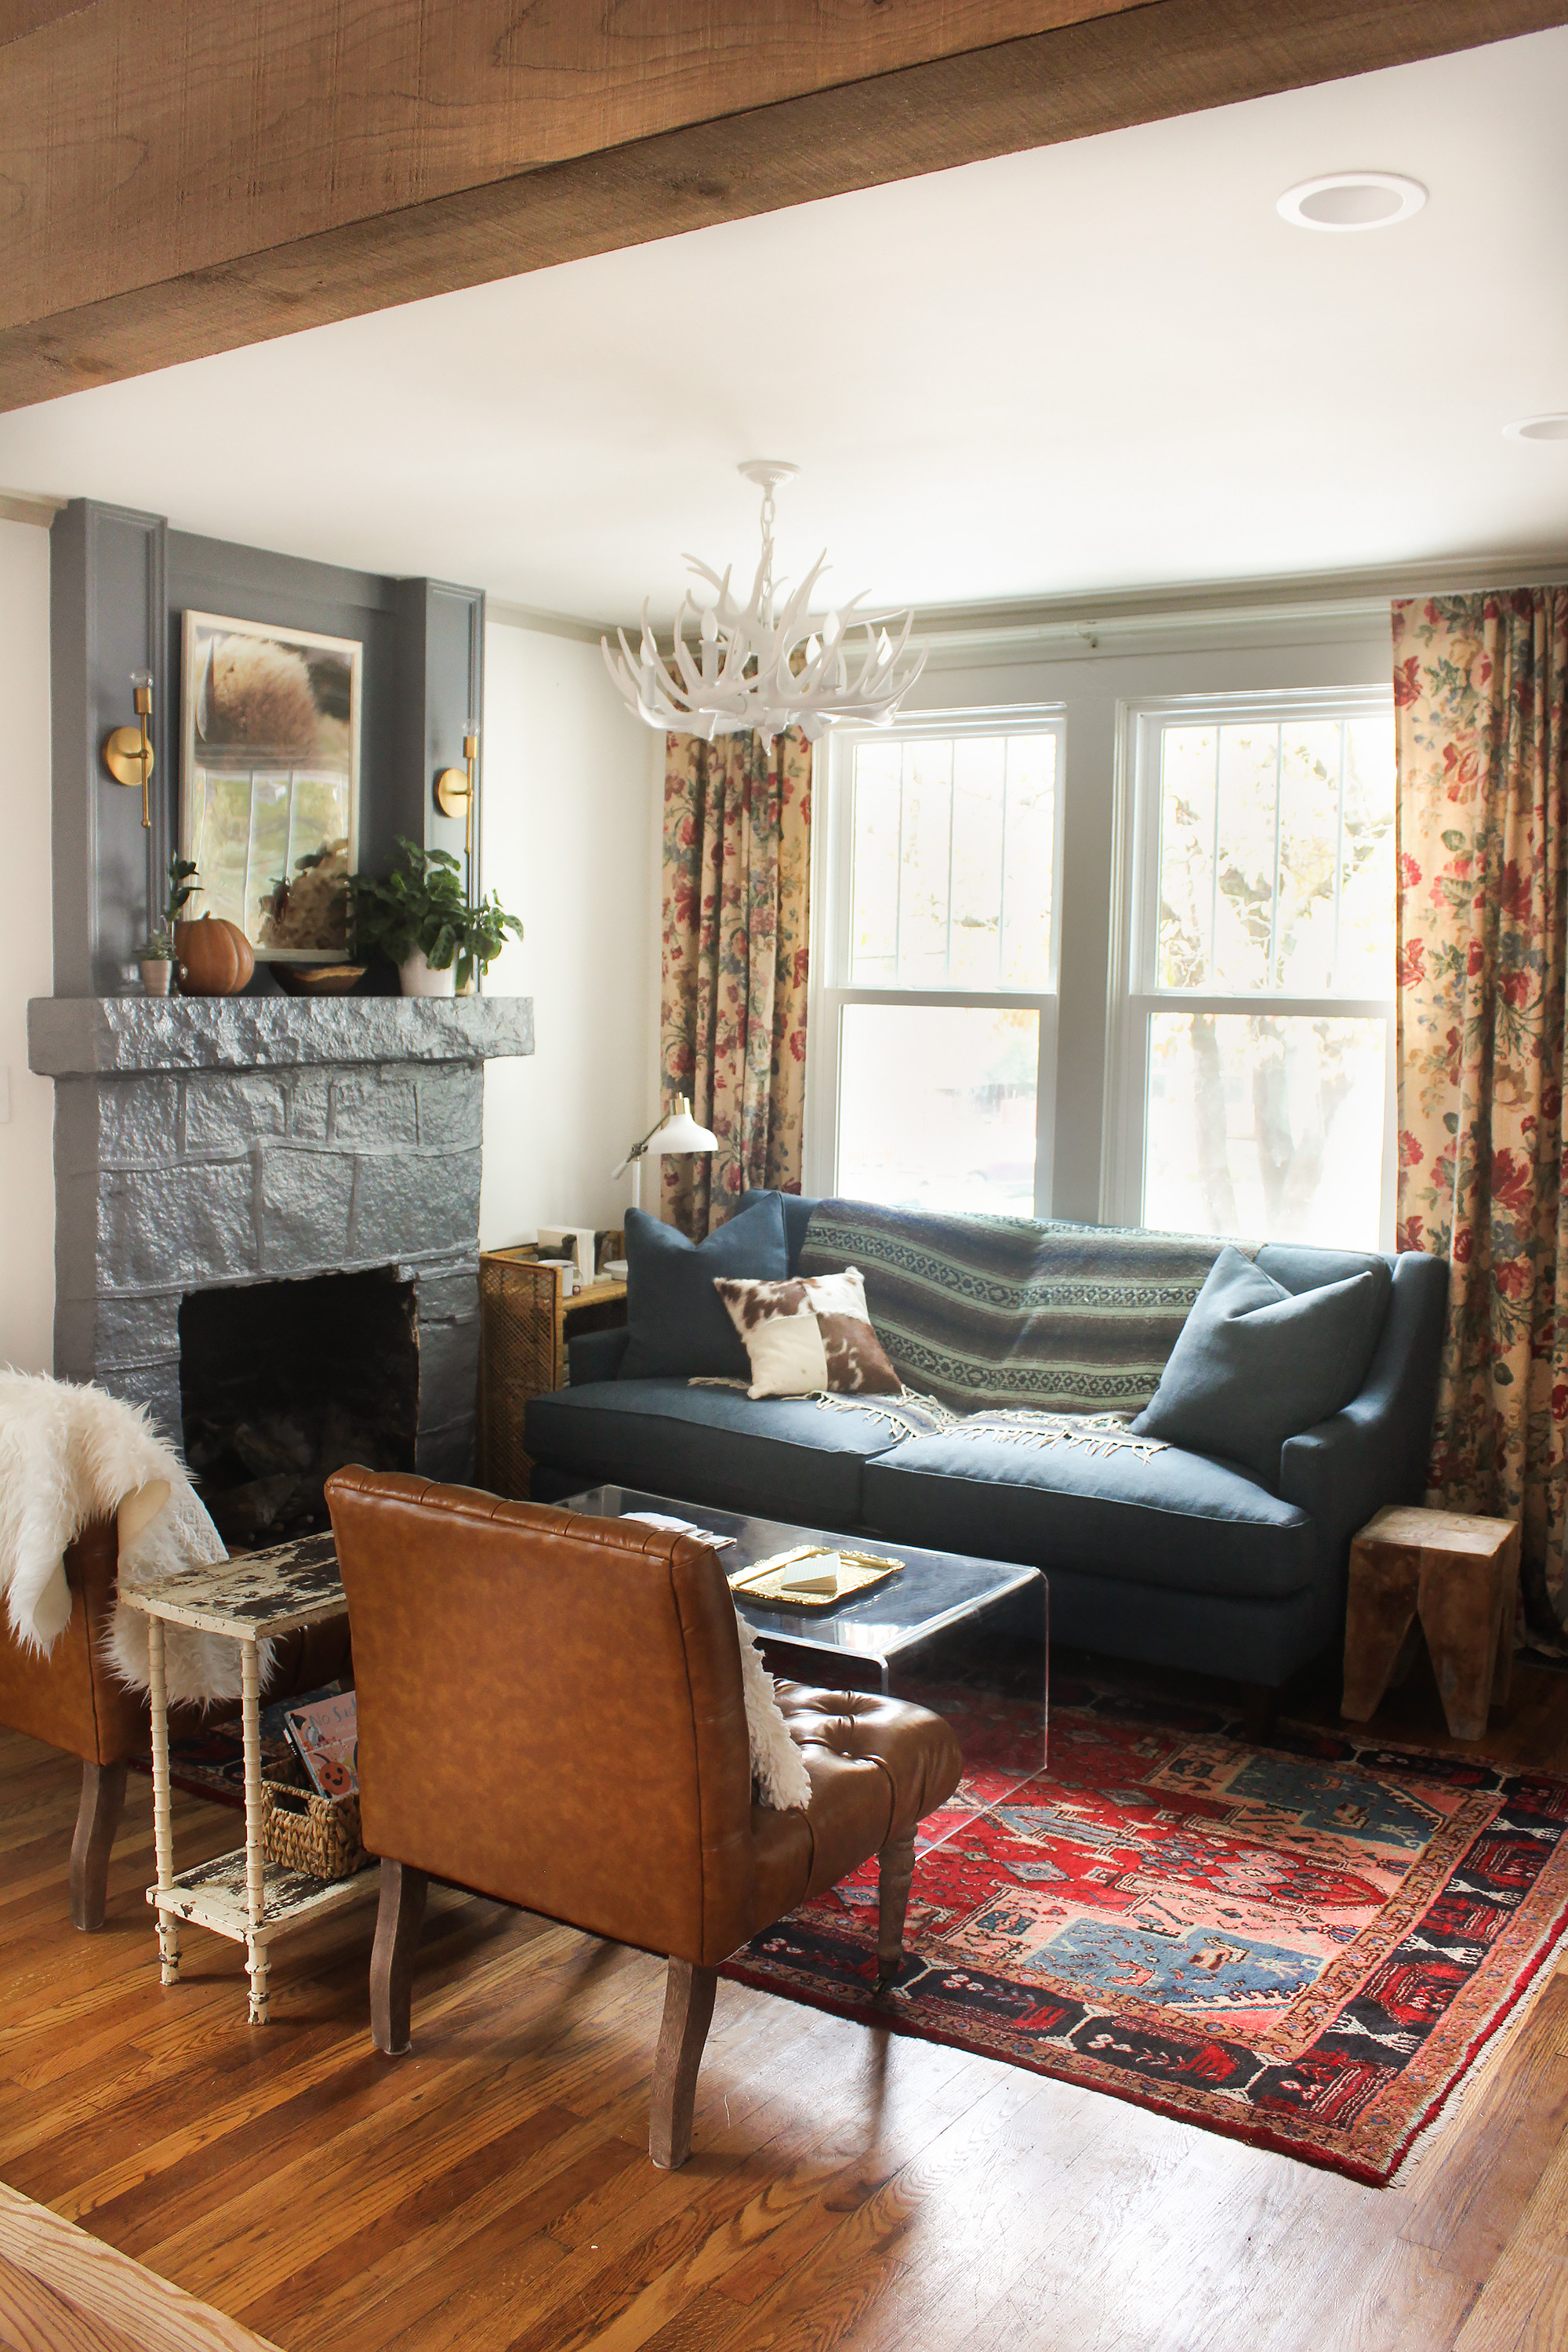 Eclectic Cottage Living Room Reveal - thewhitebuffalostylingco.com